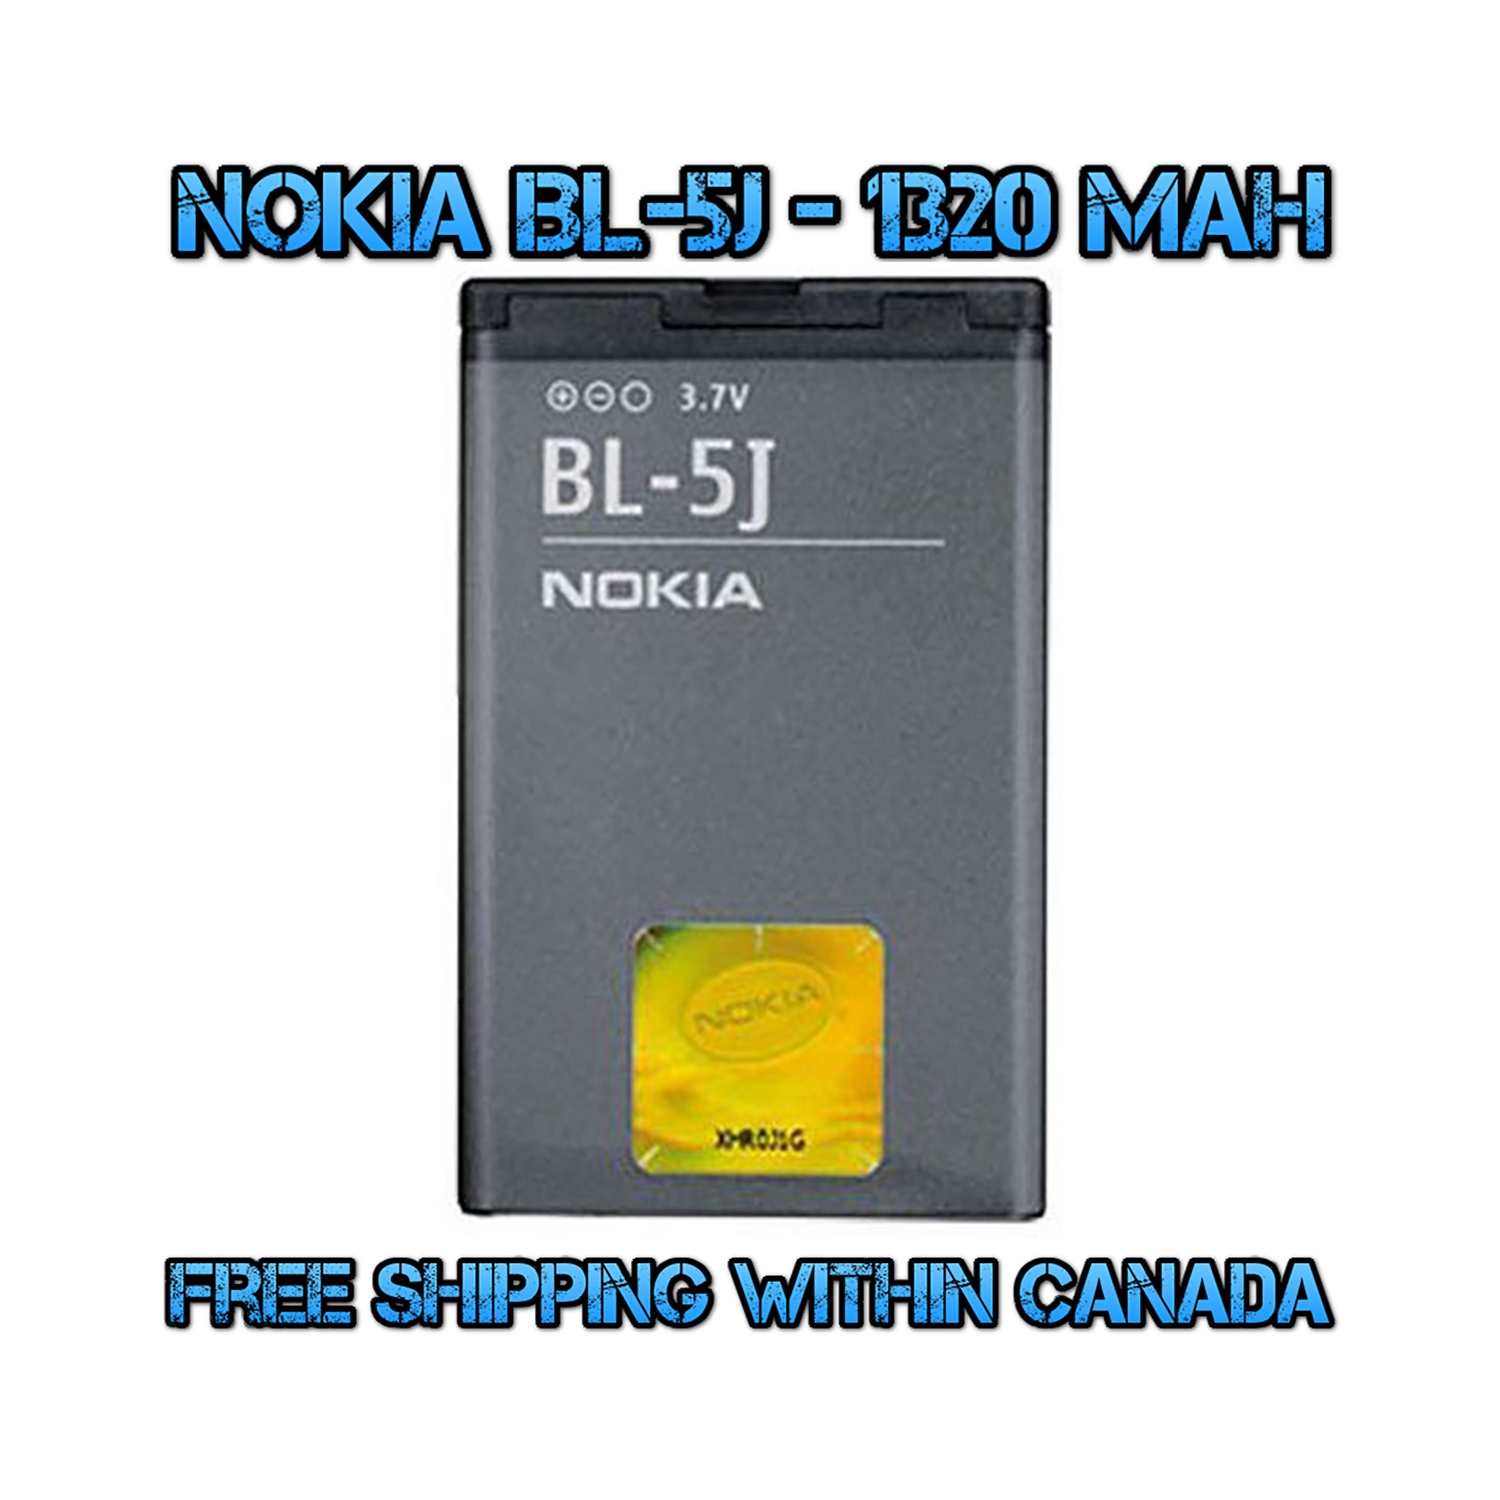 New OEM Replacement Battery Model BL-5J 1320 mAh for Nokia 5228, 5230 Nuron, 5233, 5235, 5800 Xpressmusic - (FREE SHIPPING)